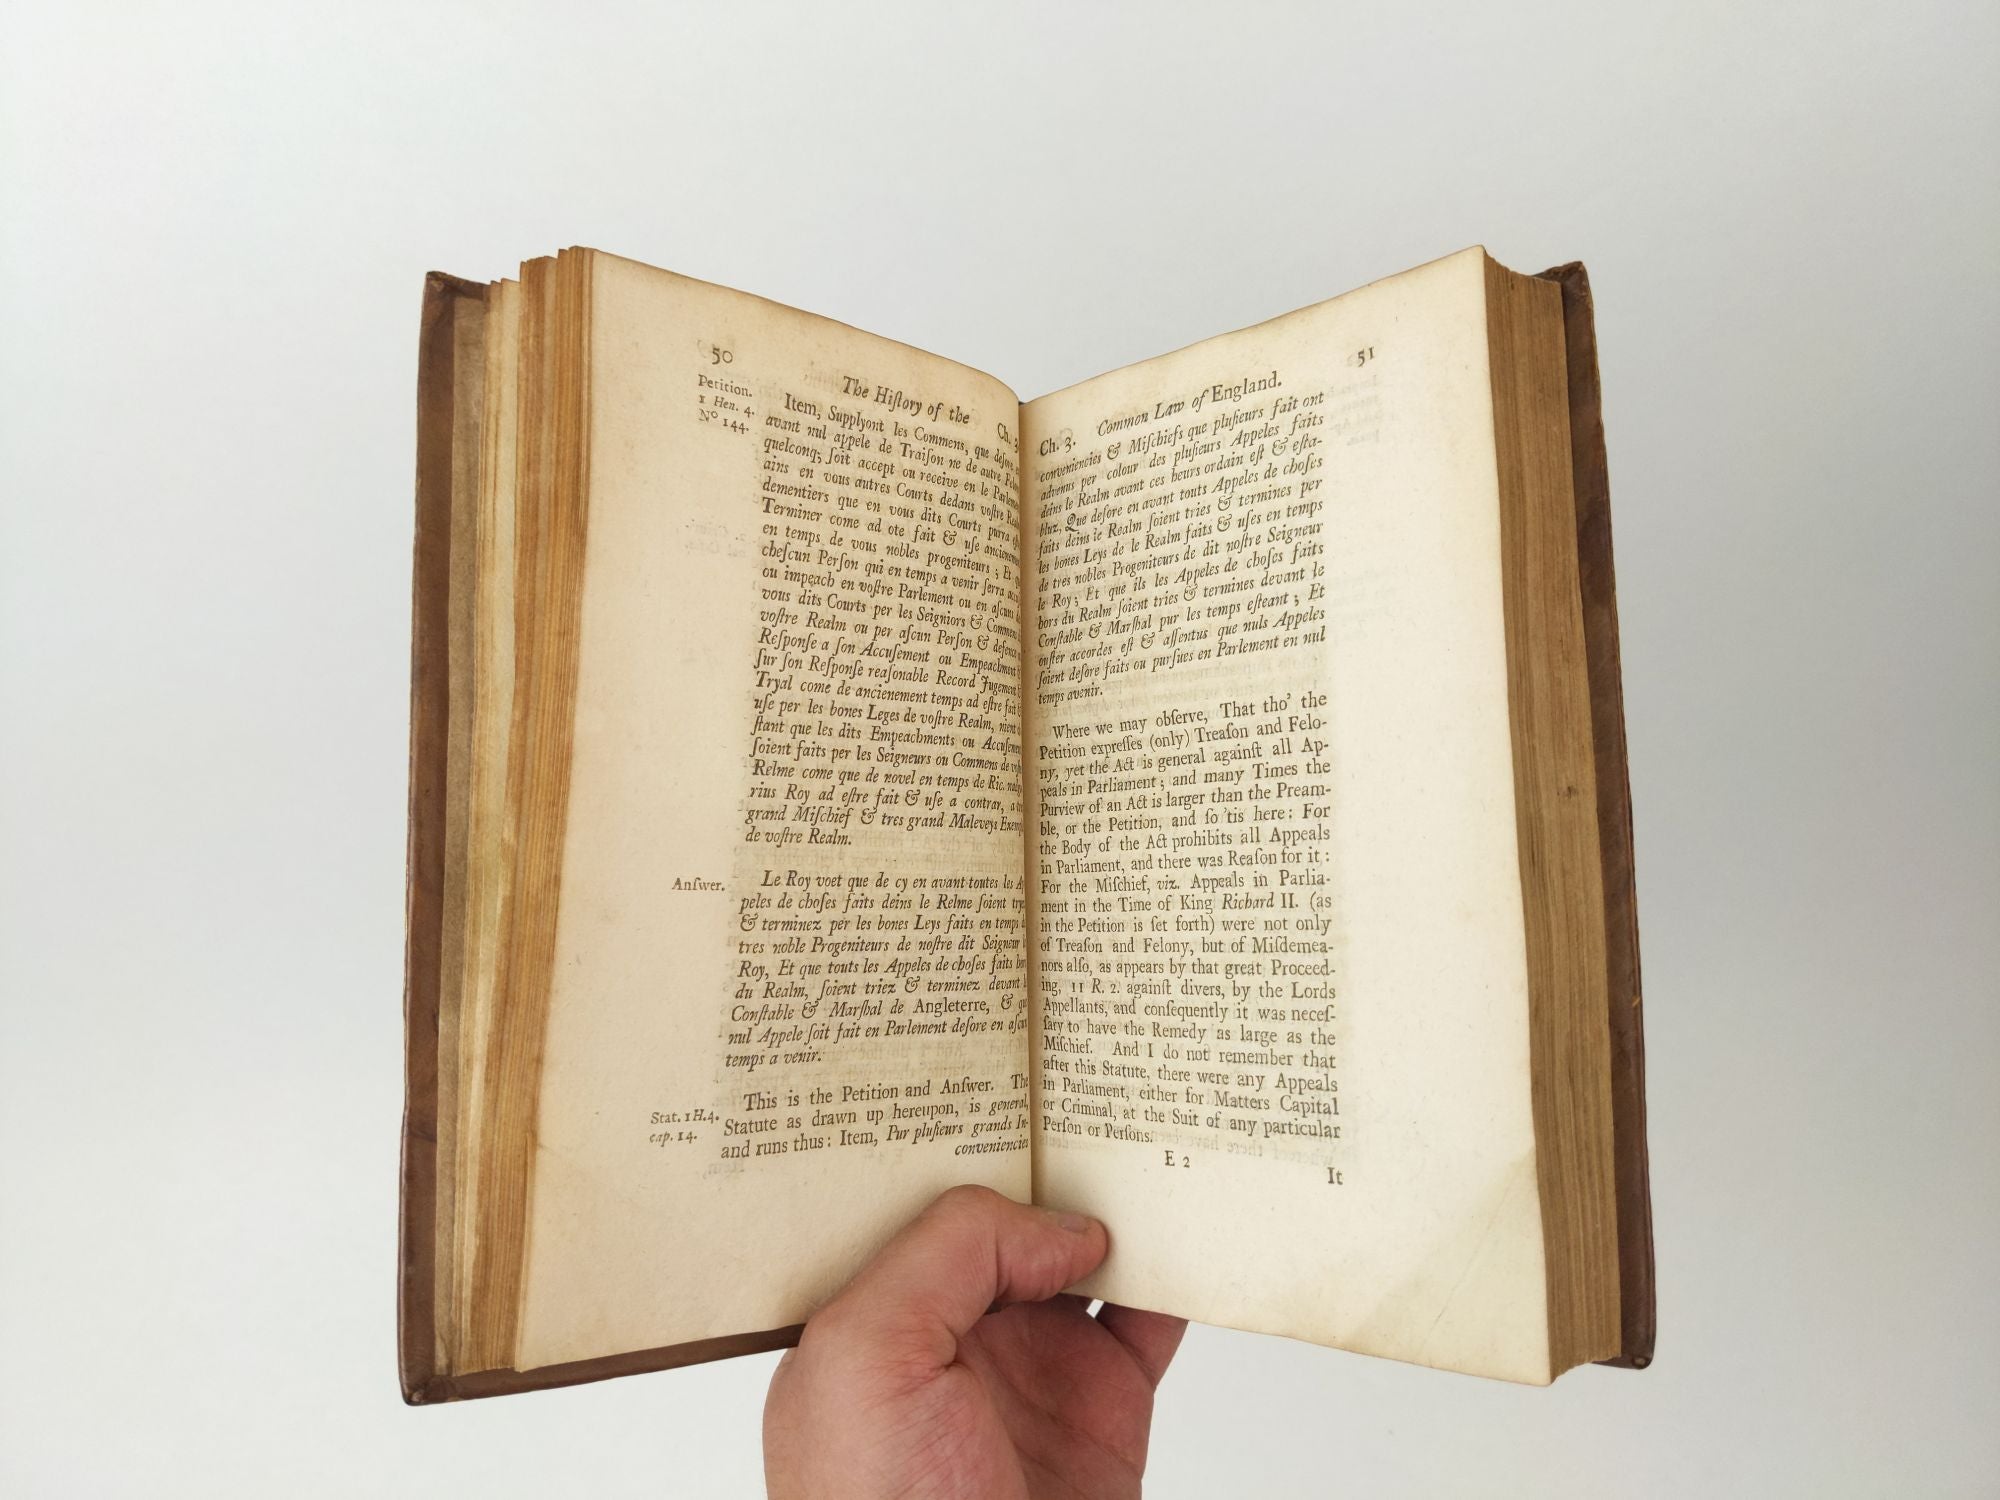 Product Image for The History of the Common Law of England [bound with] The Analysis of the Law..